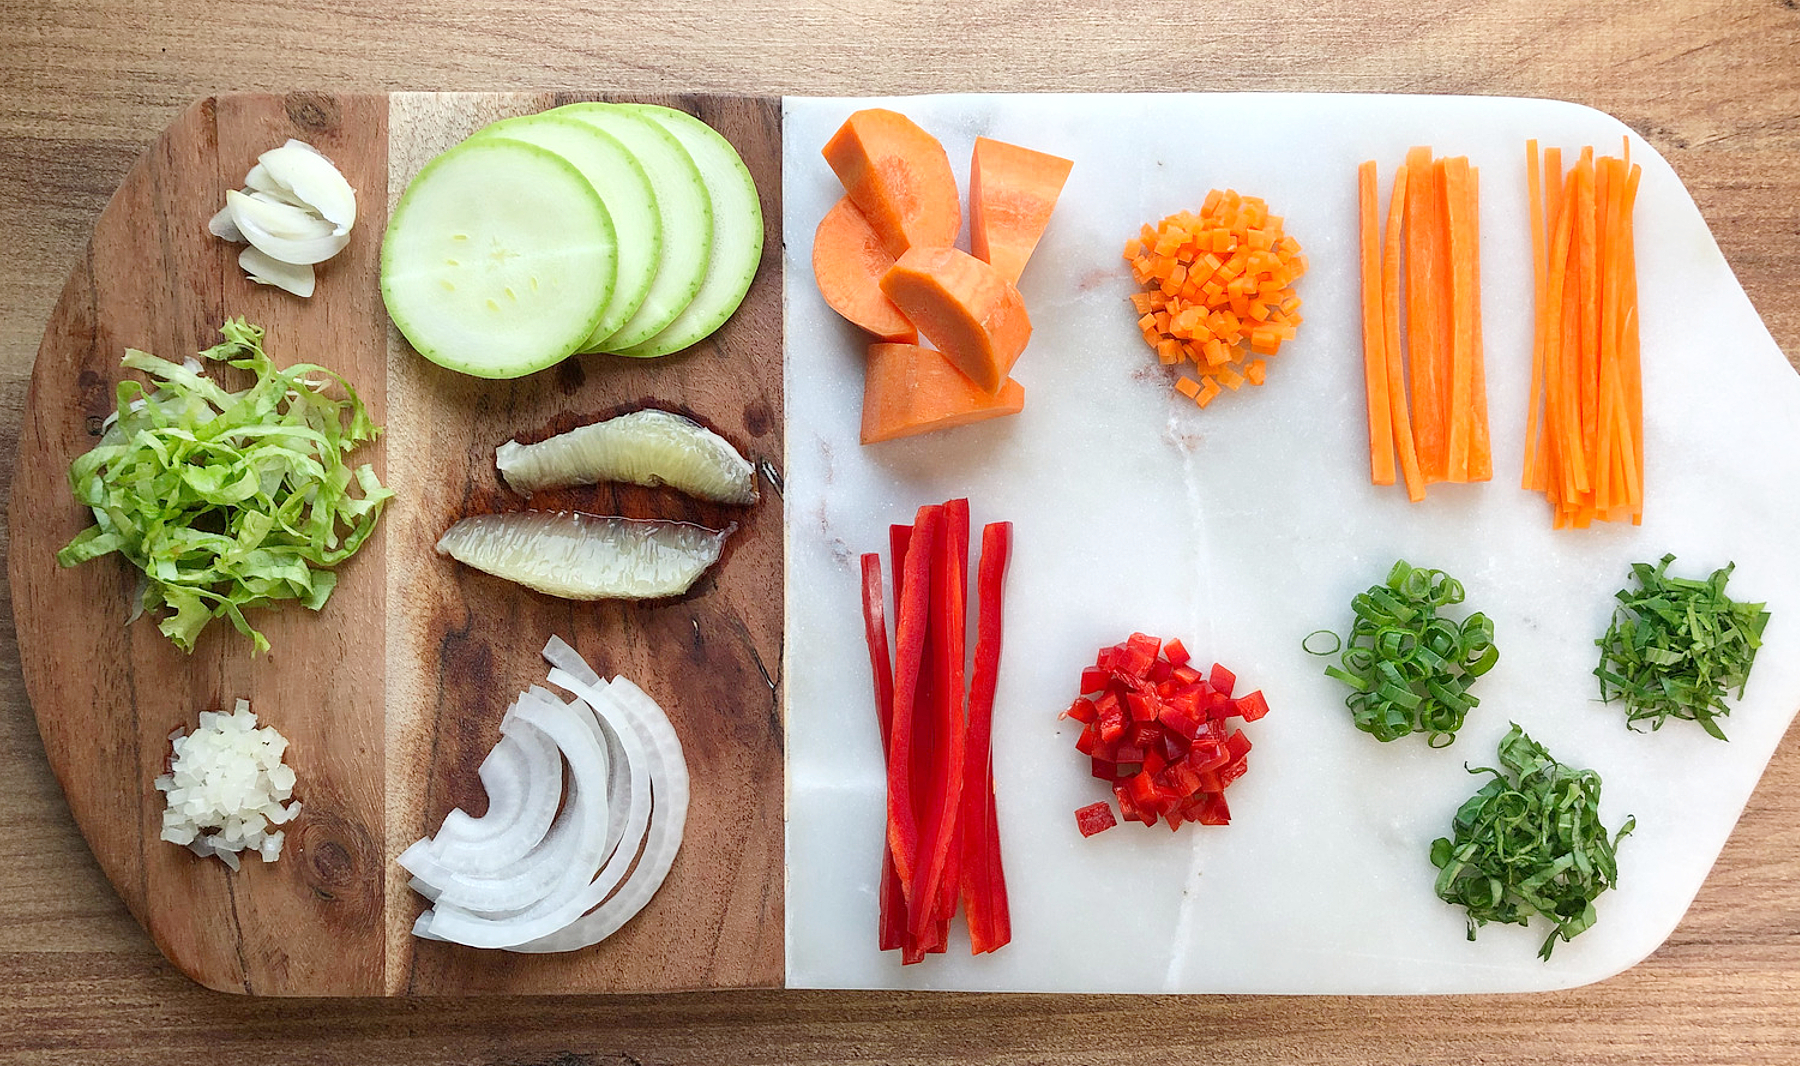 Cooking Basics: How to Cut Vegetables #1 